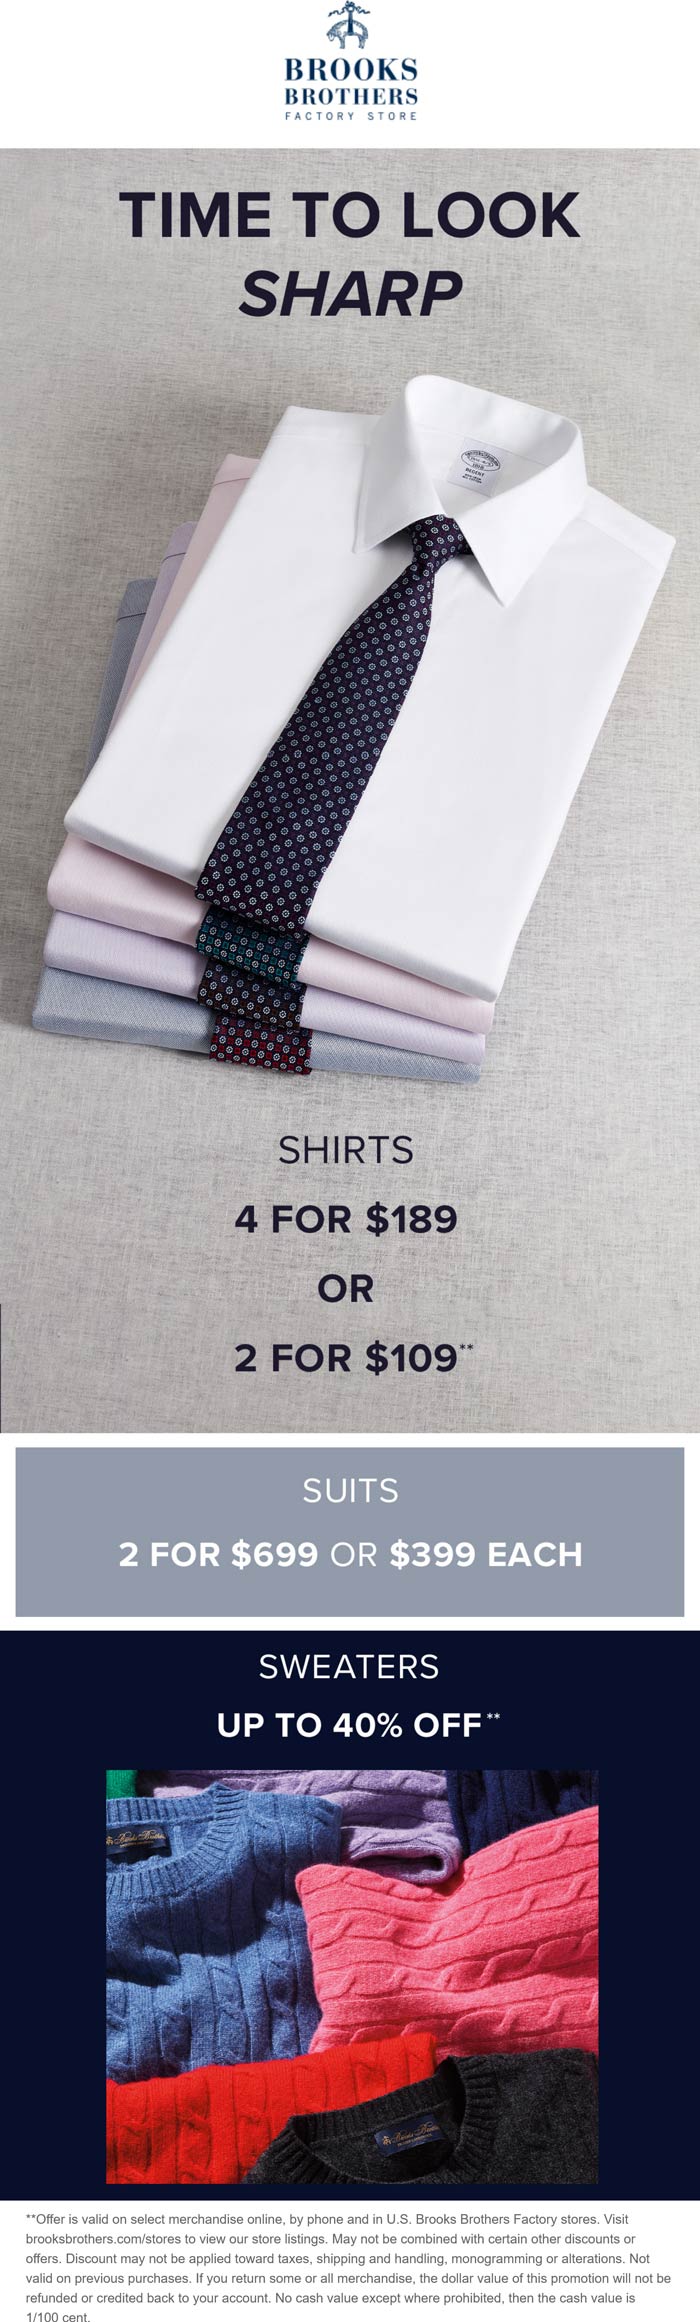 Brooks Brothers Factory Store stores Coupon  2 suits for $699 & 4 shirts for $189 at Brooks Brothers Factory Store #brooksbrothersfactorystore 